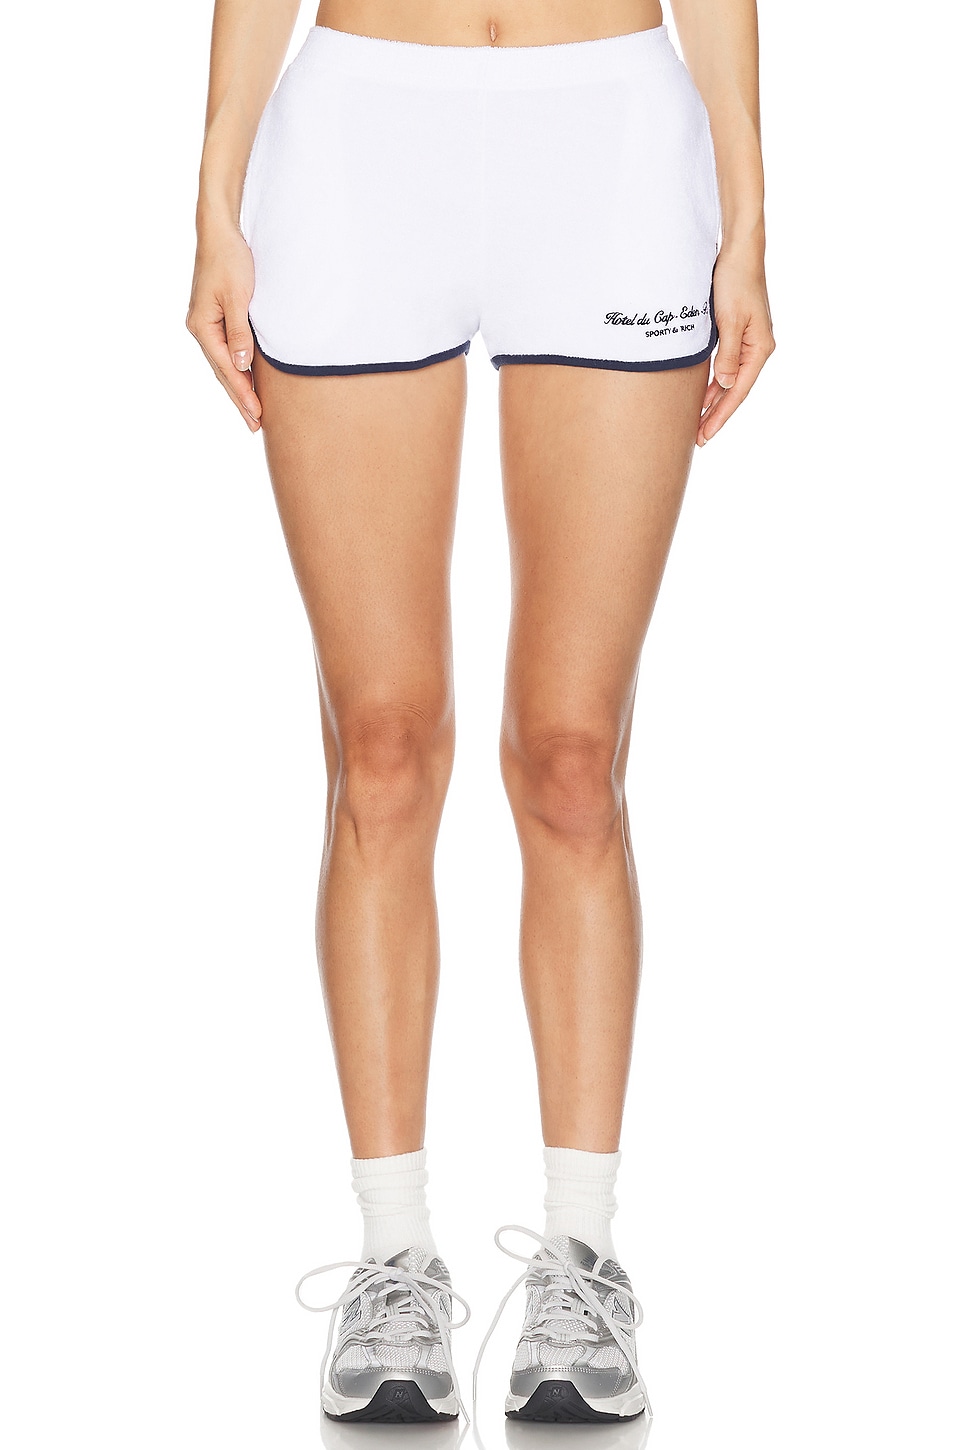 Image 1 of Sporty & Rich Hotel Du Cap Cursive Terry Short in White & Navy